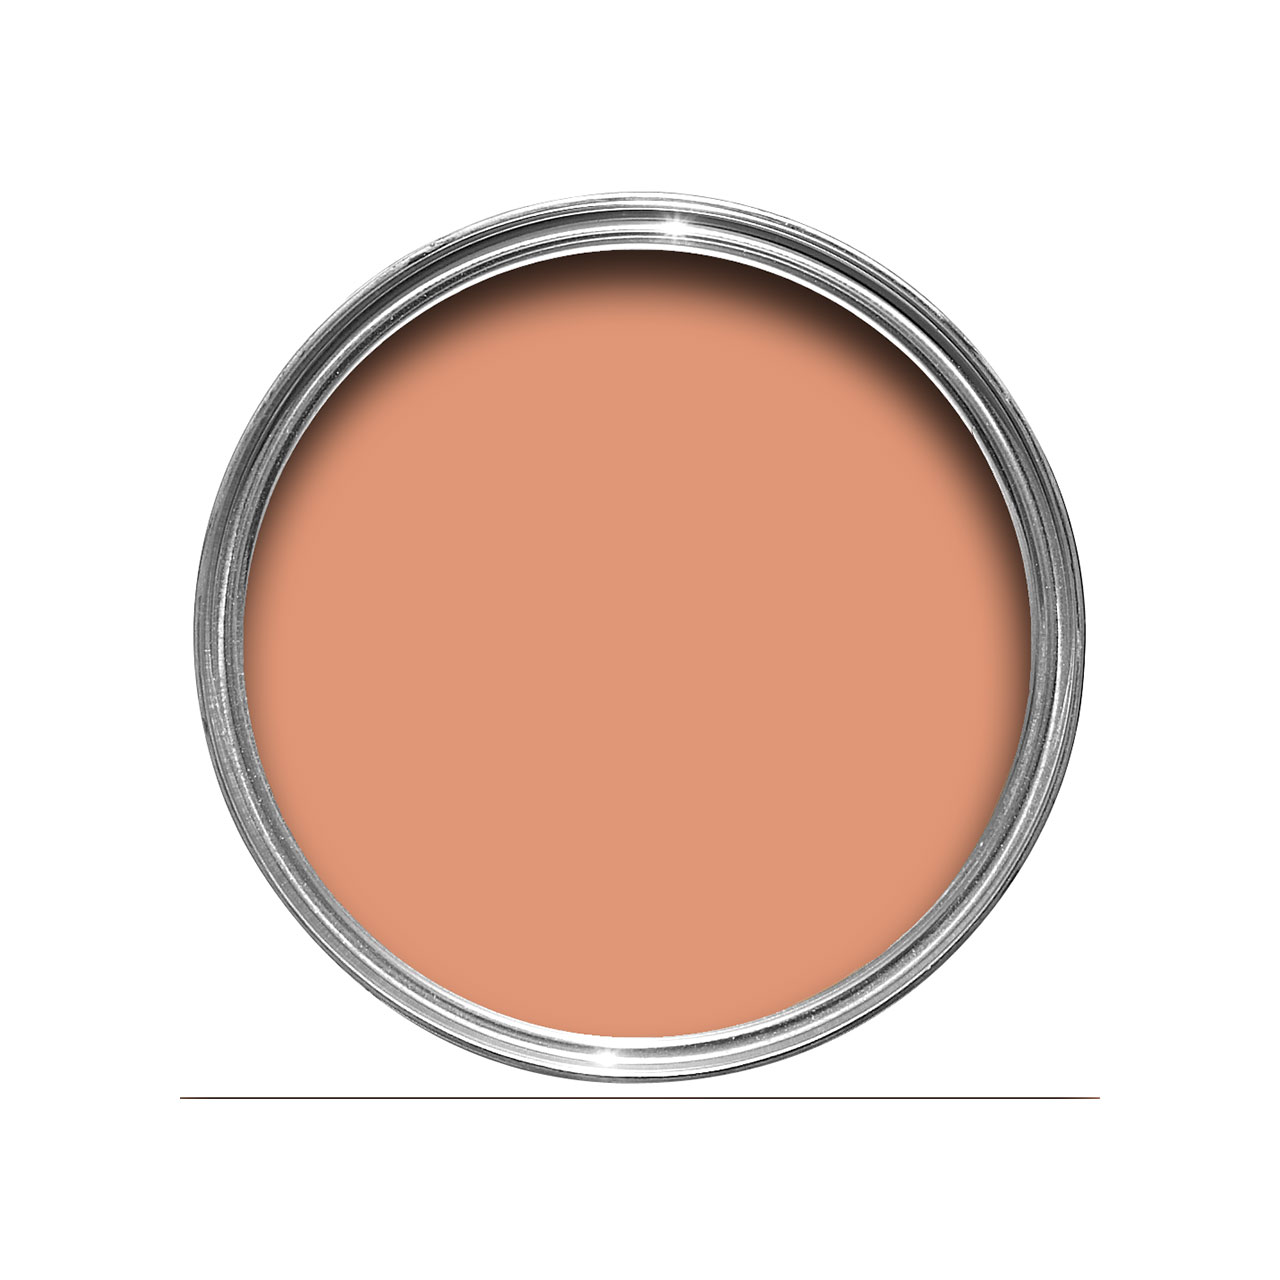 Archive Collection: Ointment Pink (21)